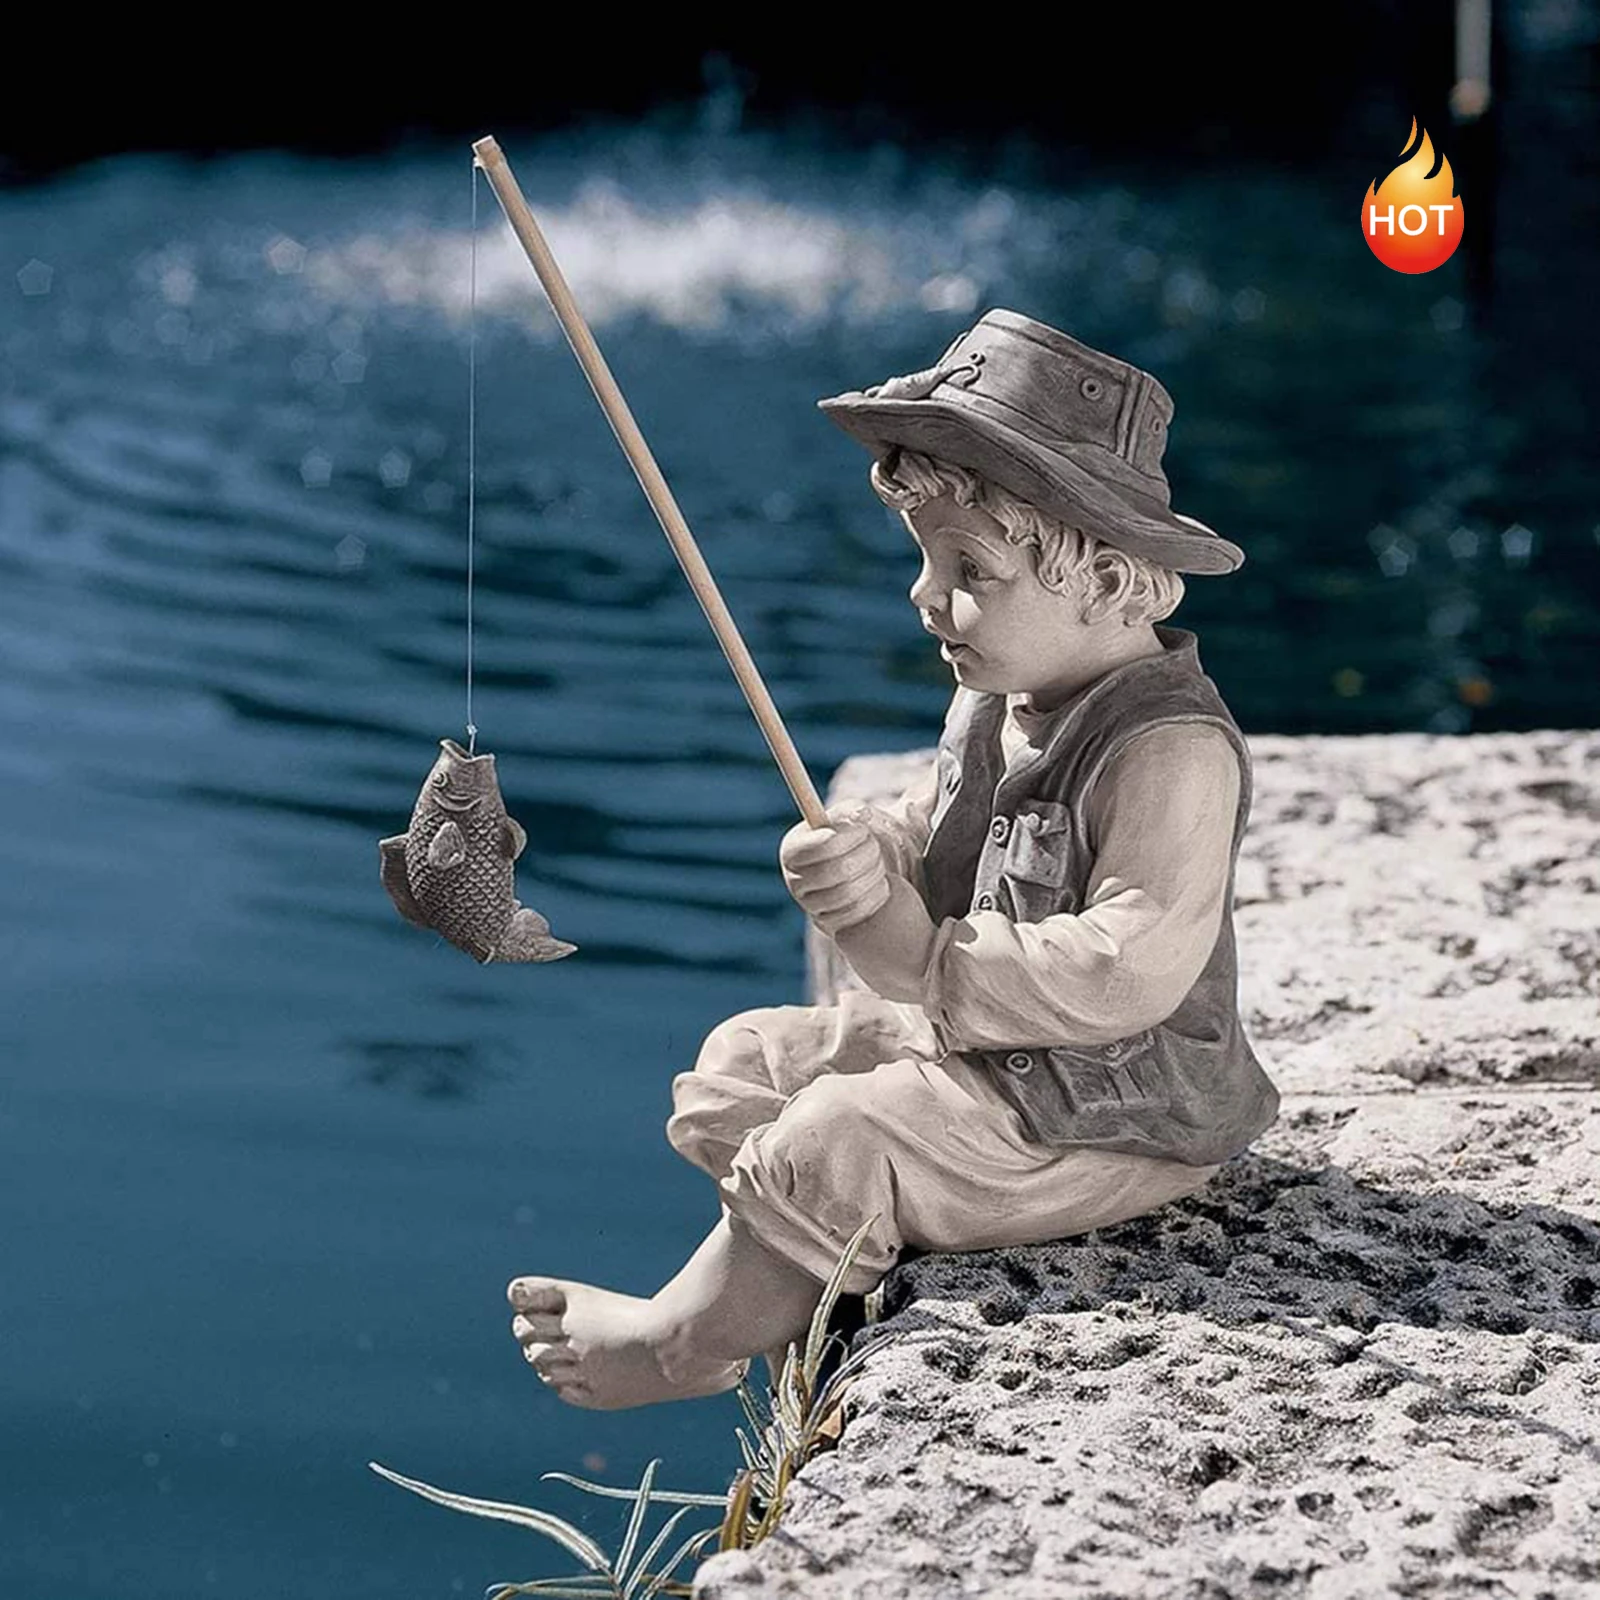 Garden Statue Resin Fisherman Gone Fishing Boy Garden Sculpture Ornaments with Fishing Rod Figurine Sculpture for Pool Pond Yard images - 6